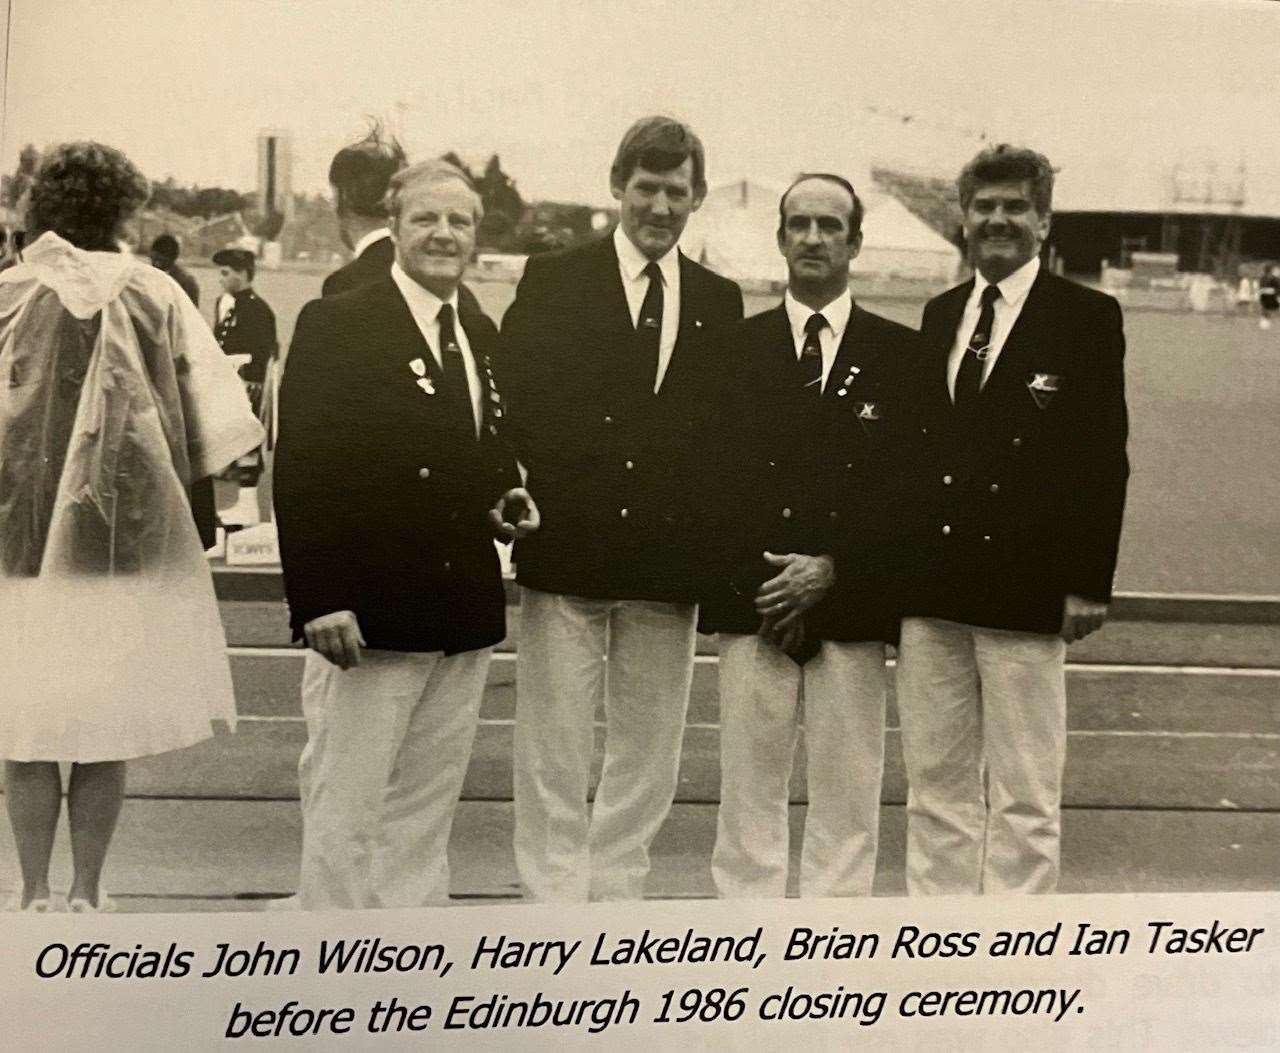 Ian Tasker (far right) at the Commonwealth Games in 1986.